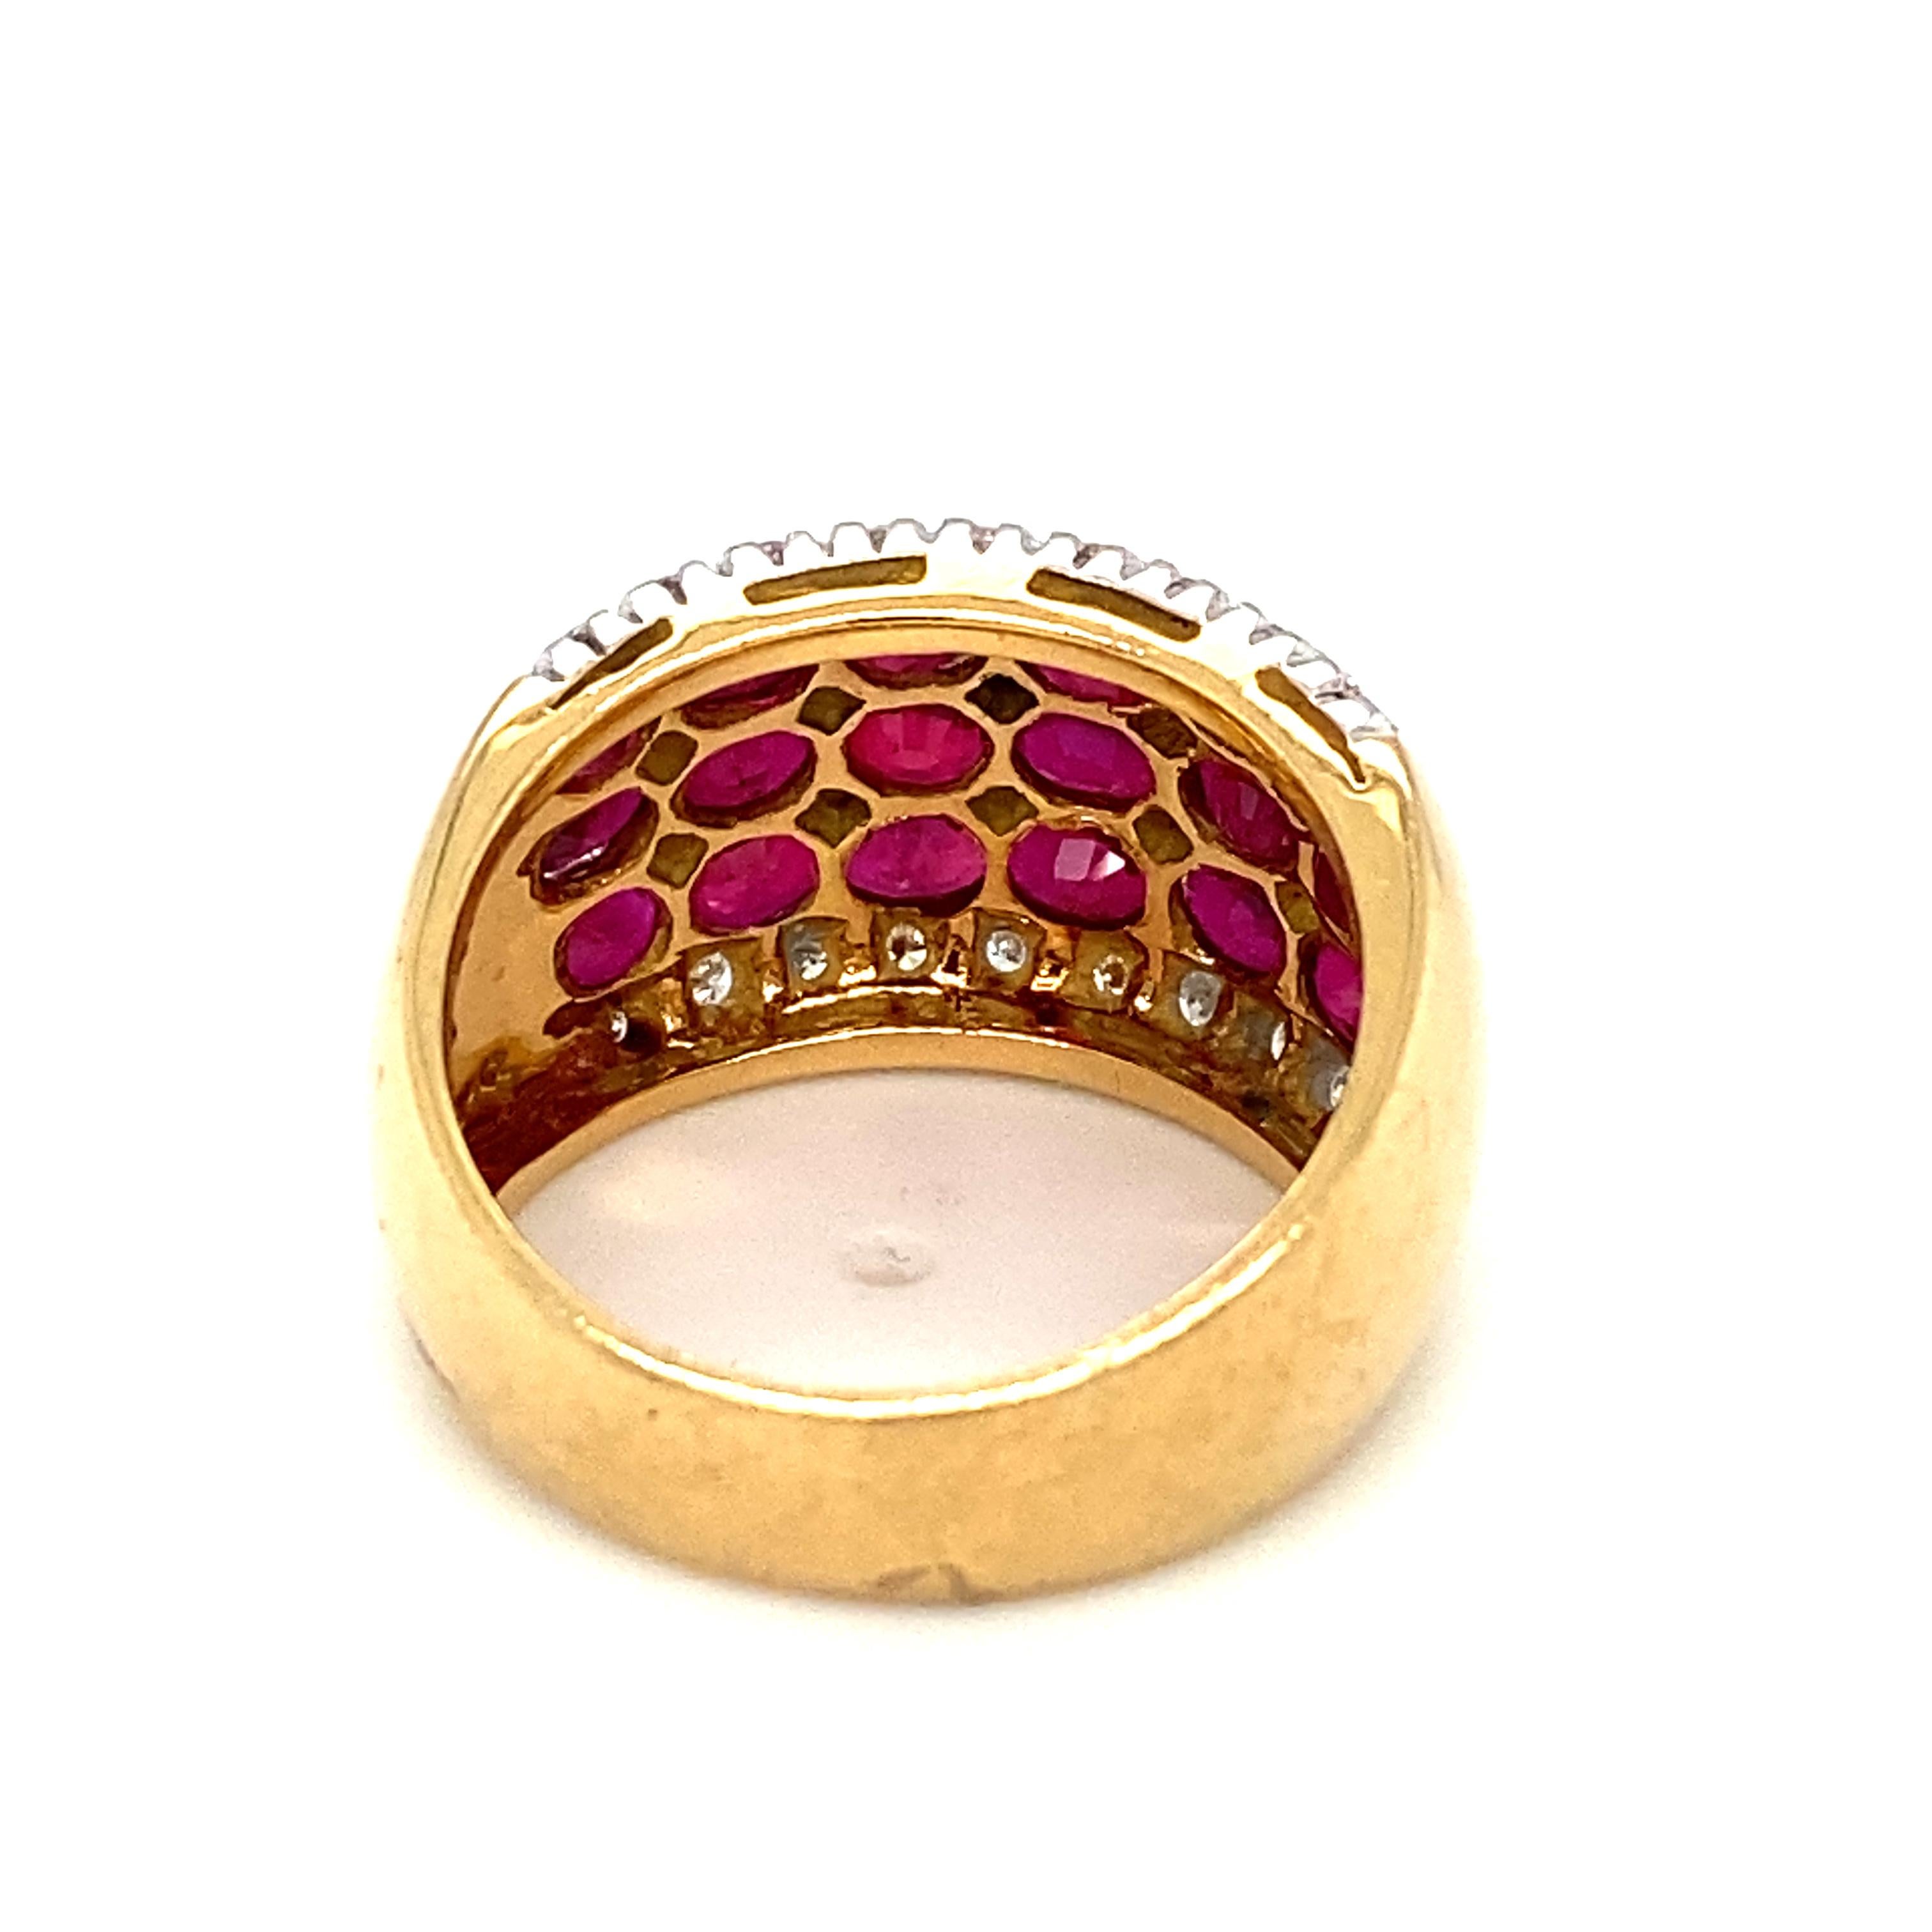 Item Details: This band by LE VIAN has oval rubies totaling two carats with accent diamonds between. Crafted in two tone 18 karat gold, It is an excellent statement designer piece!

Circa: 2000s
Metal Type: 18k yellow and white gold
Weight: 9.3